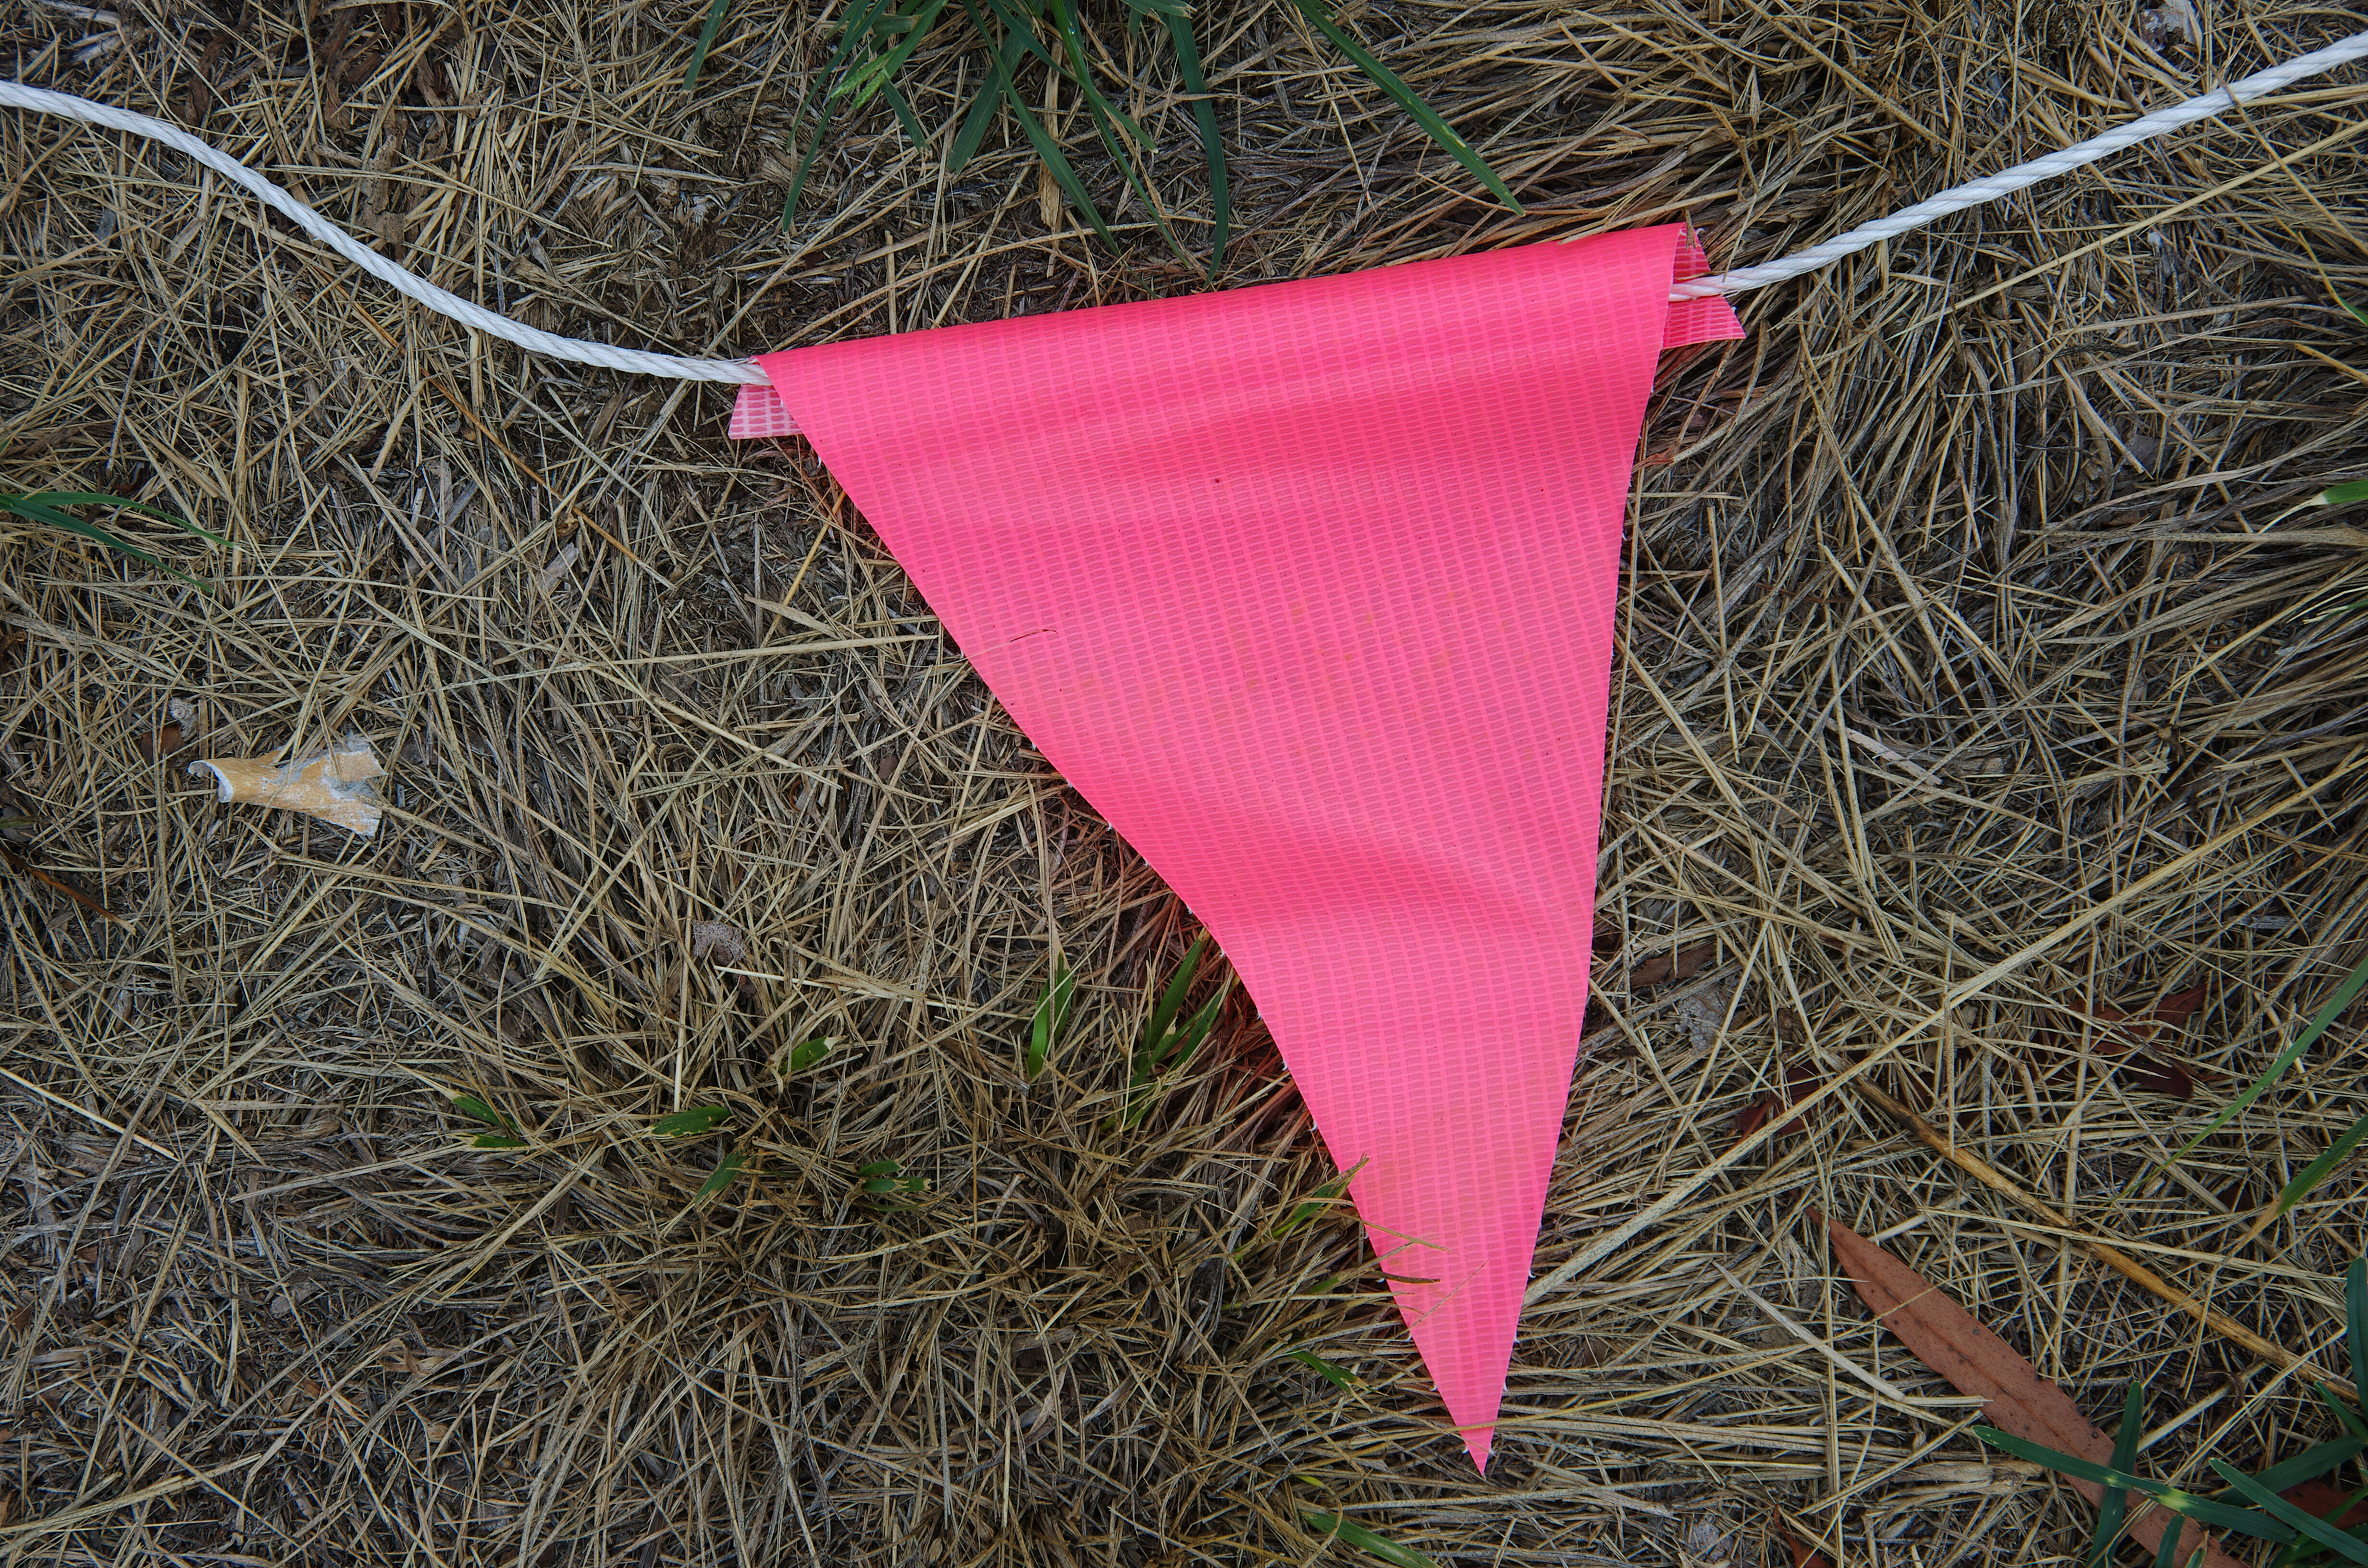 A pink flag sitting in the grass